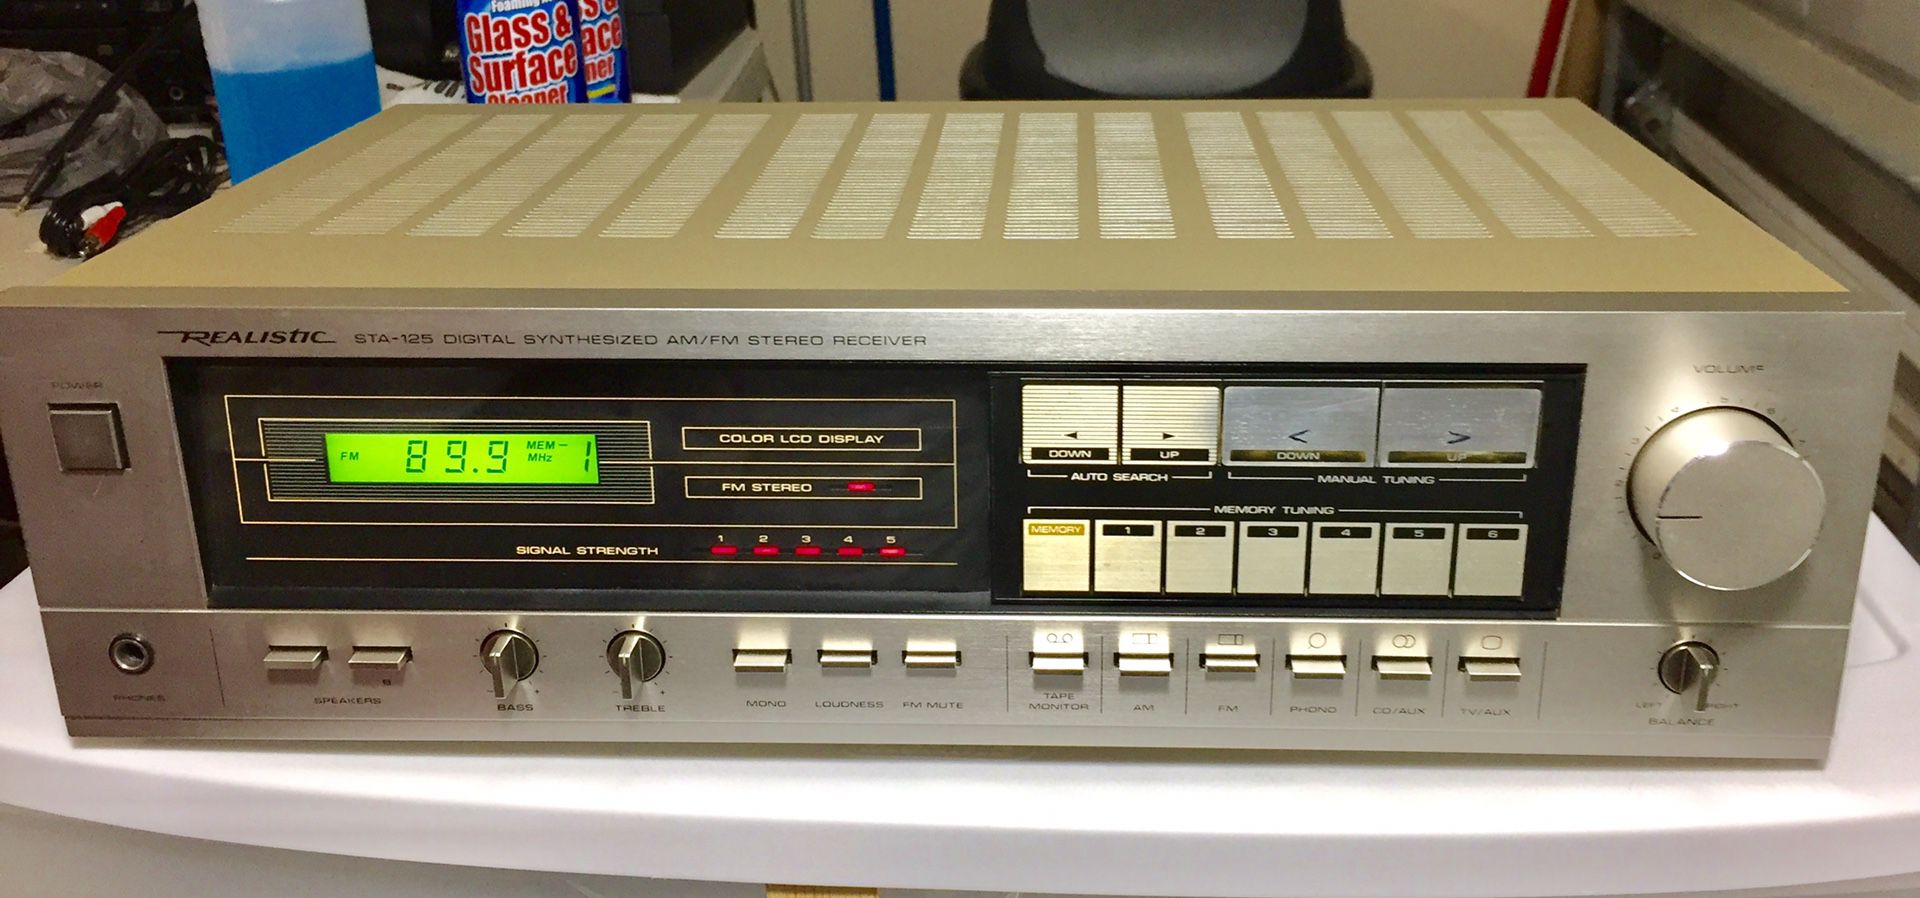 Realistic STA-125 Digital Synthesized Stereo AM/FM Receiver with Phono Input.(1986)